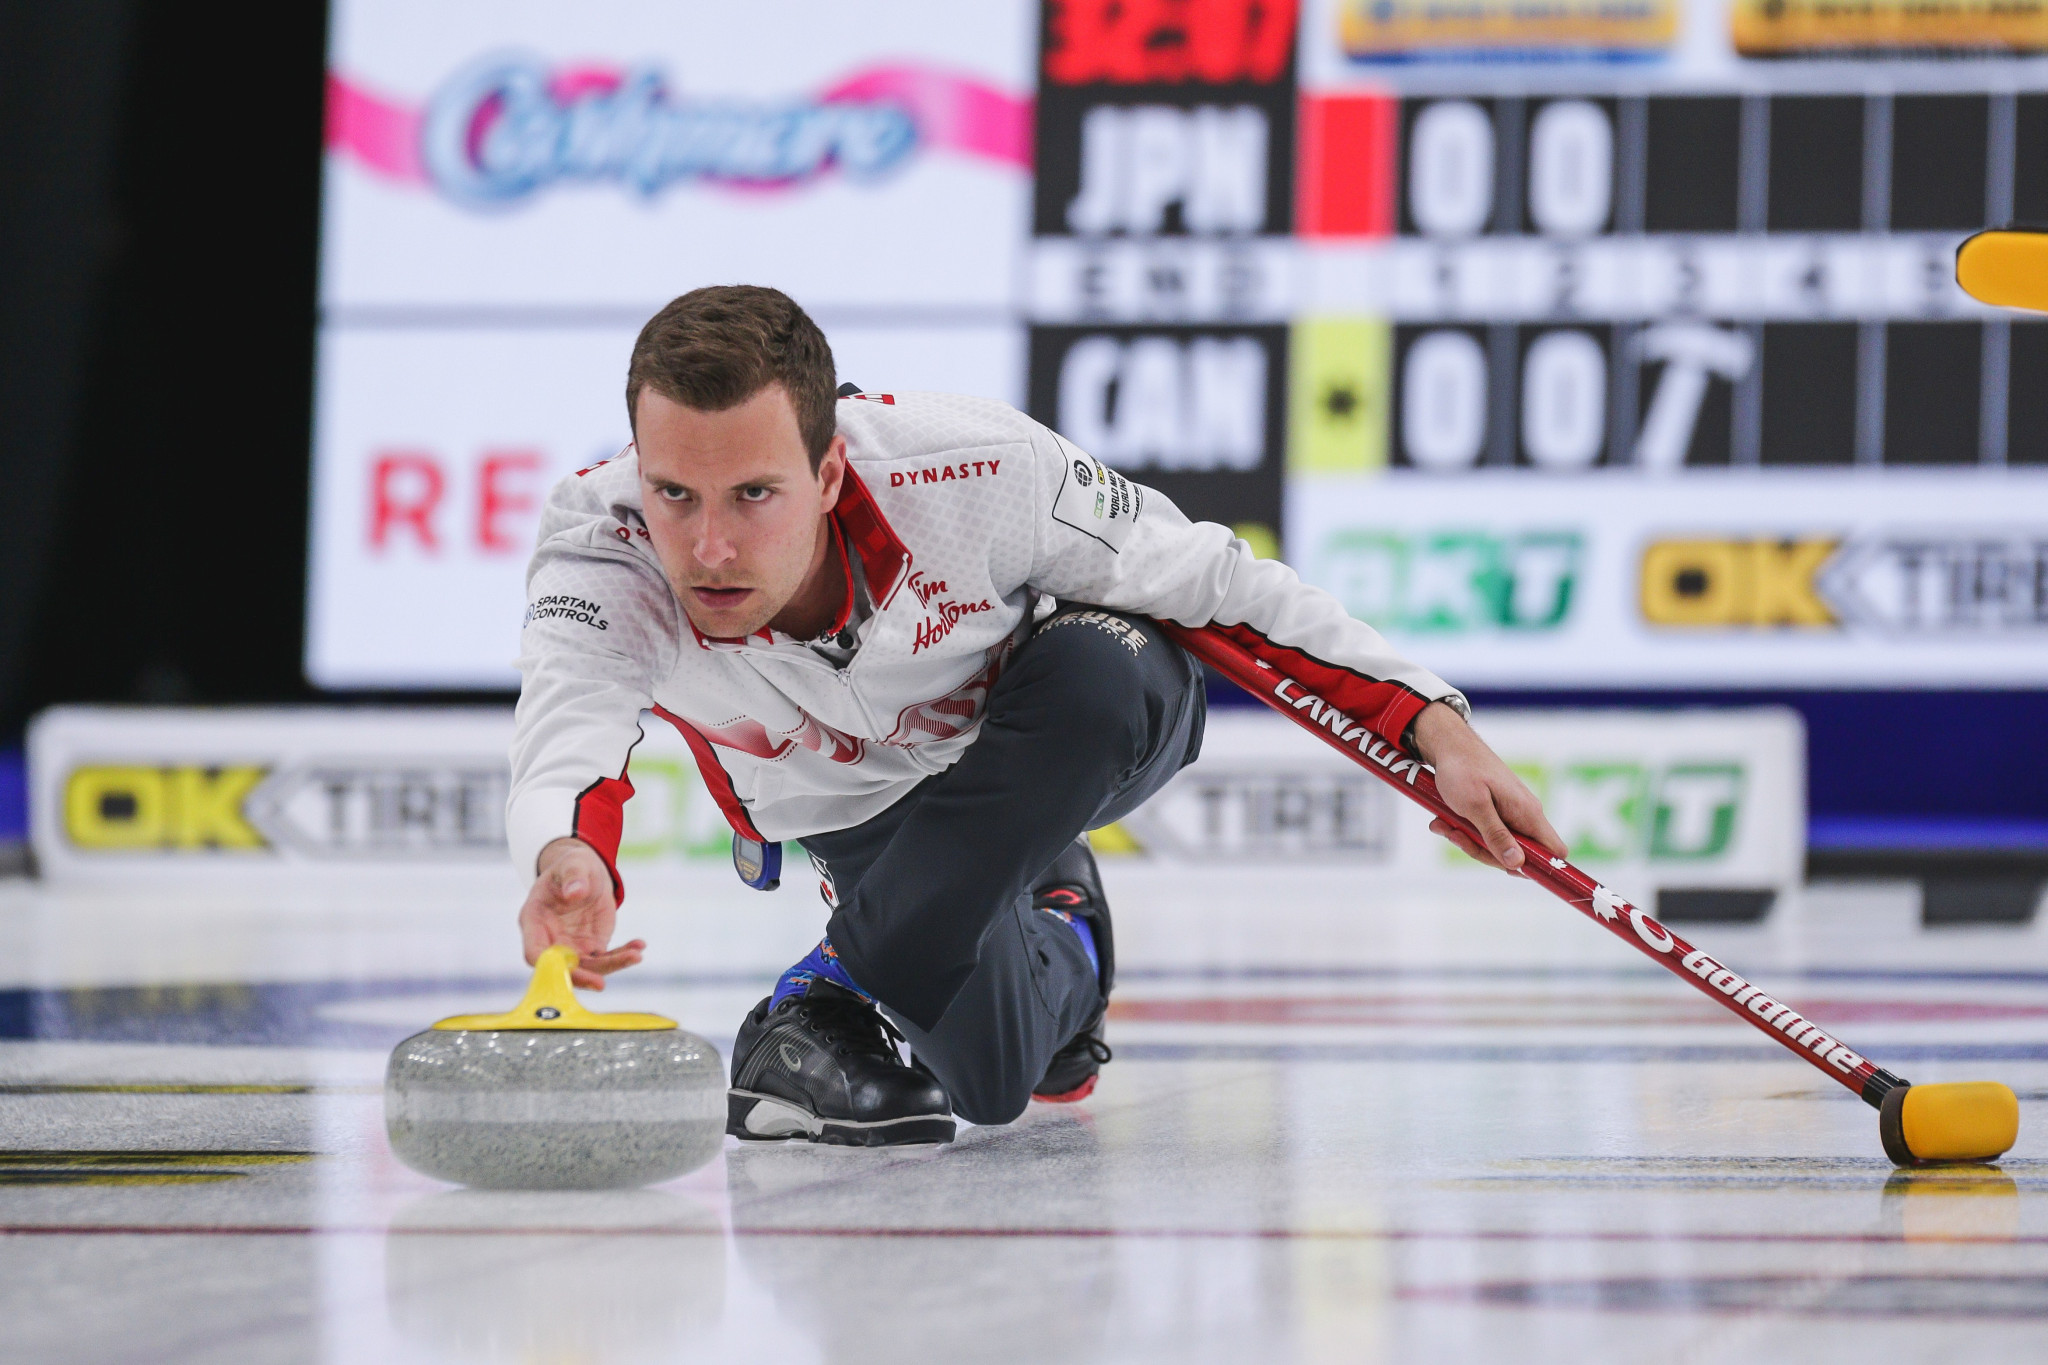 Hosts Canada off to perfect start at World Men's Curling Championship